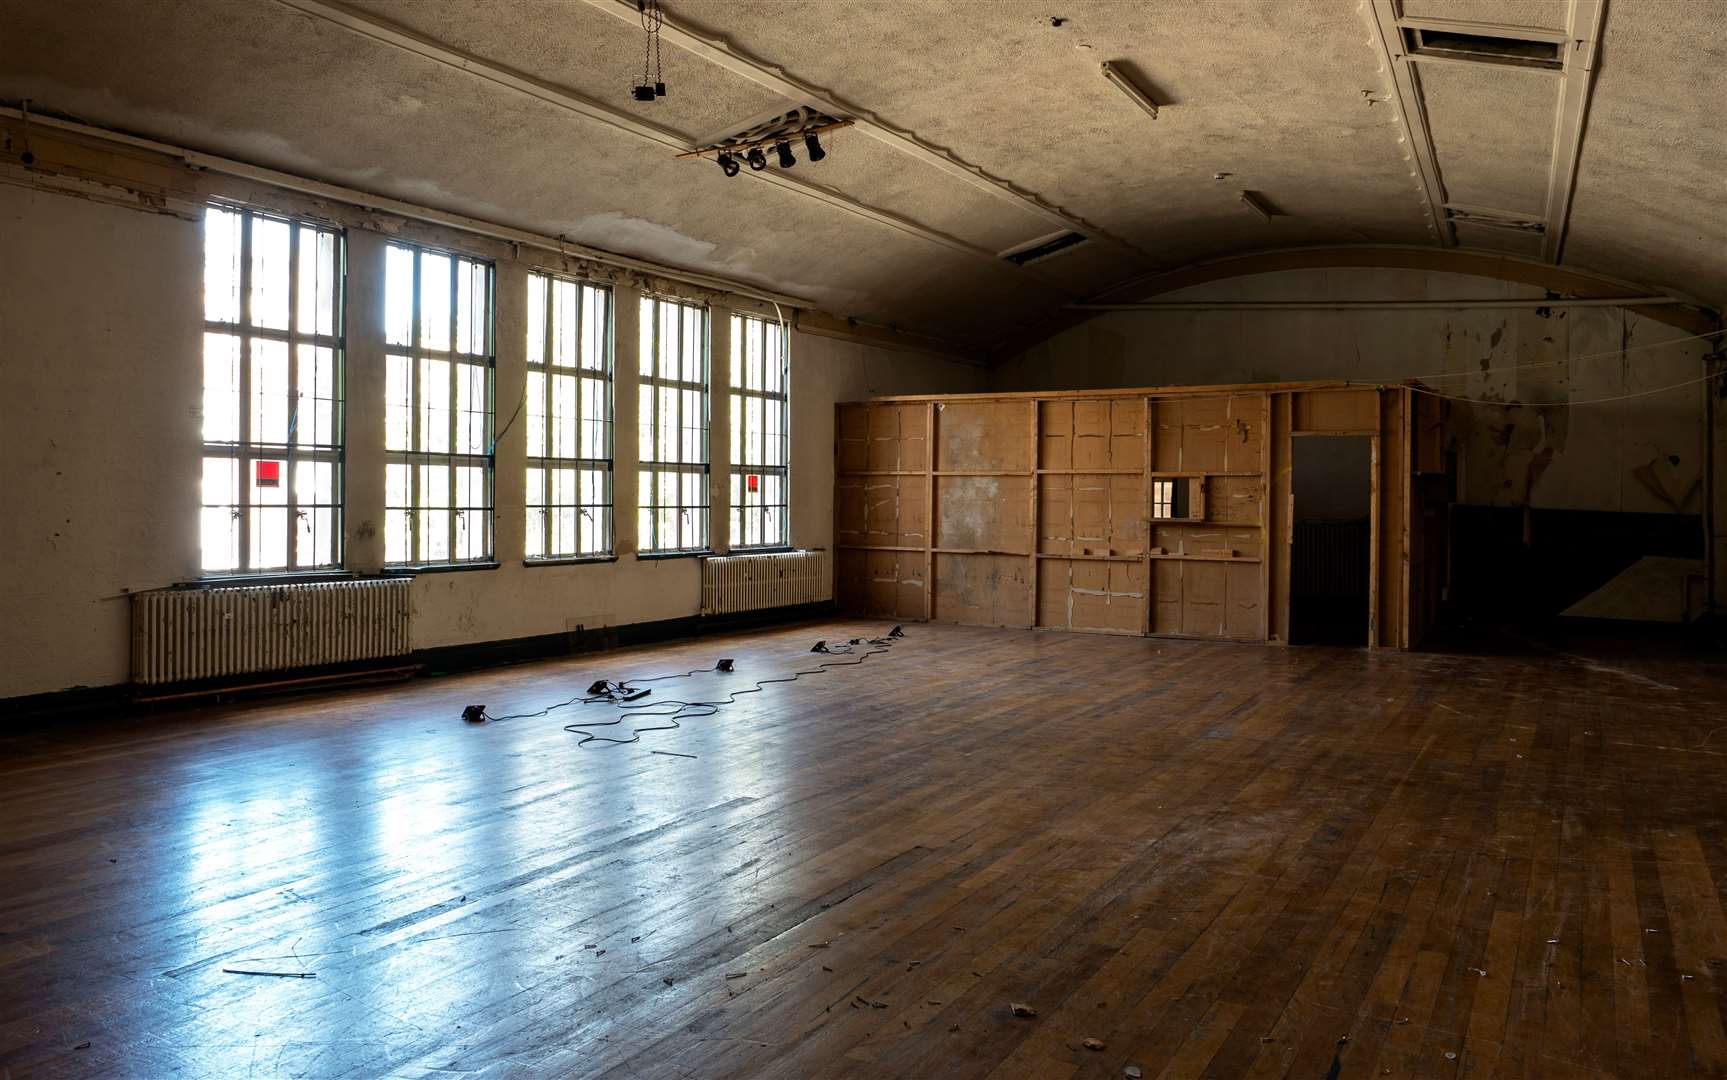 The former ballroom on the first floor, which fronts the high street, is set to be converted by ABC to provide a community event space